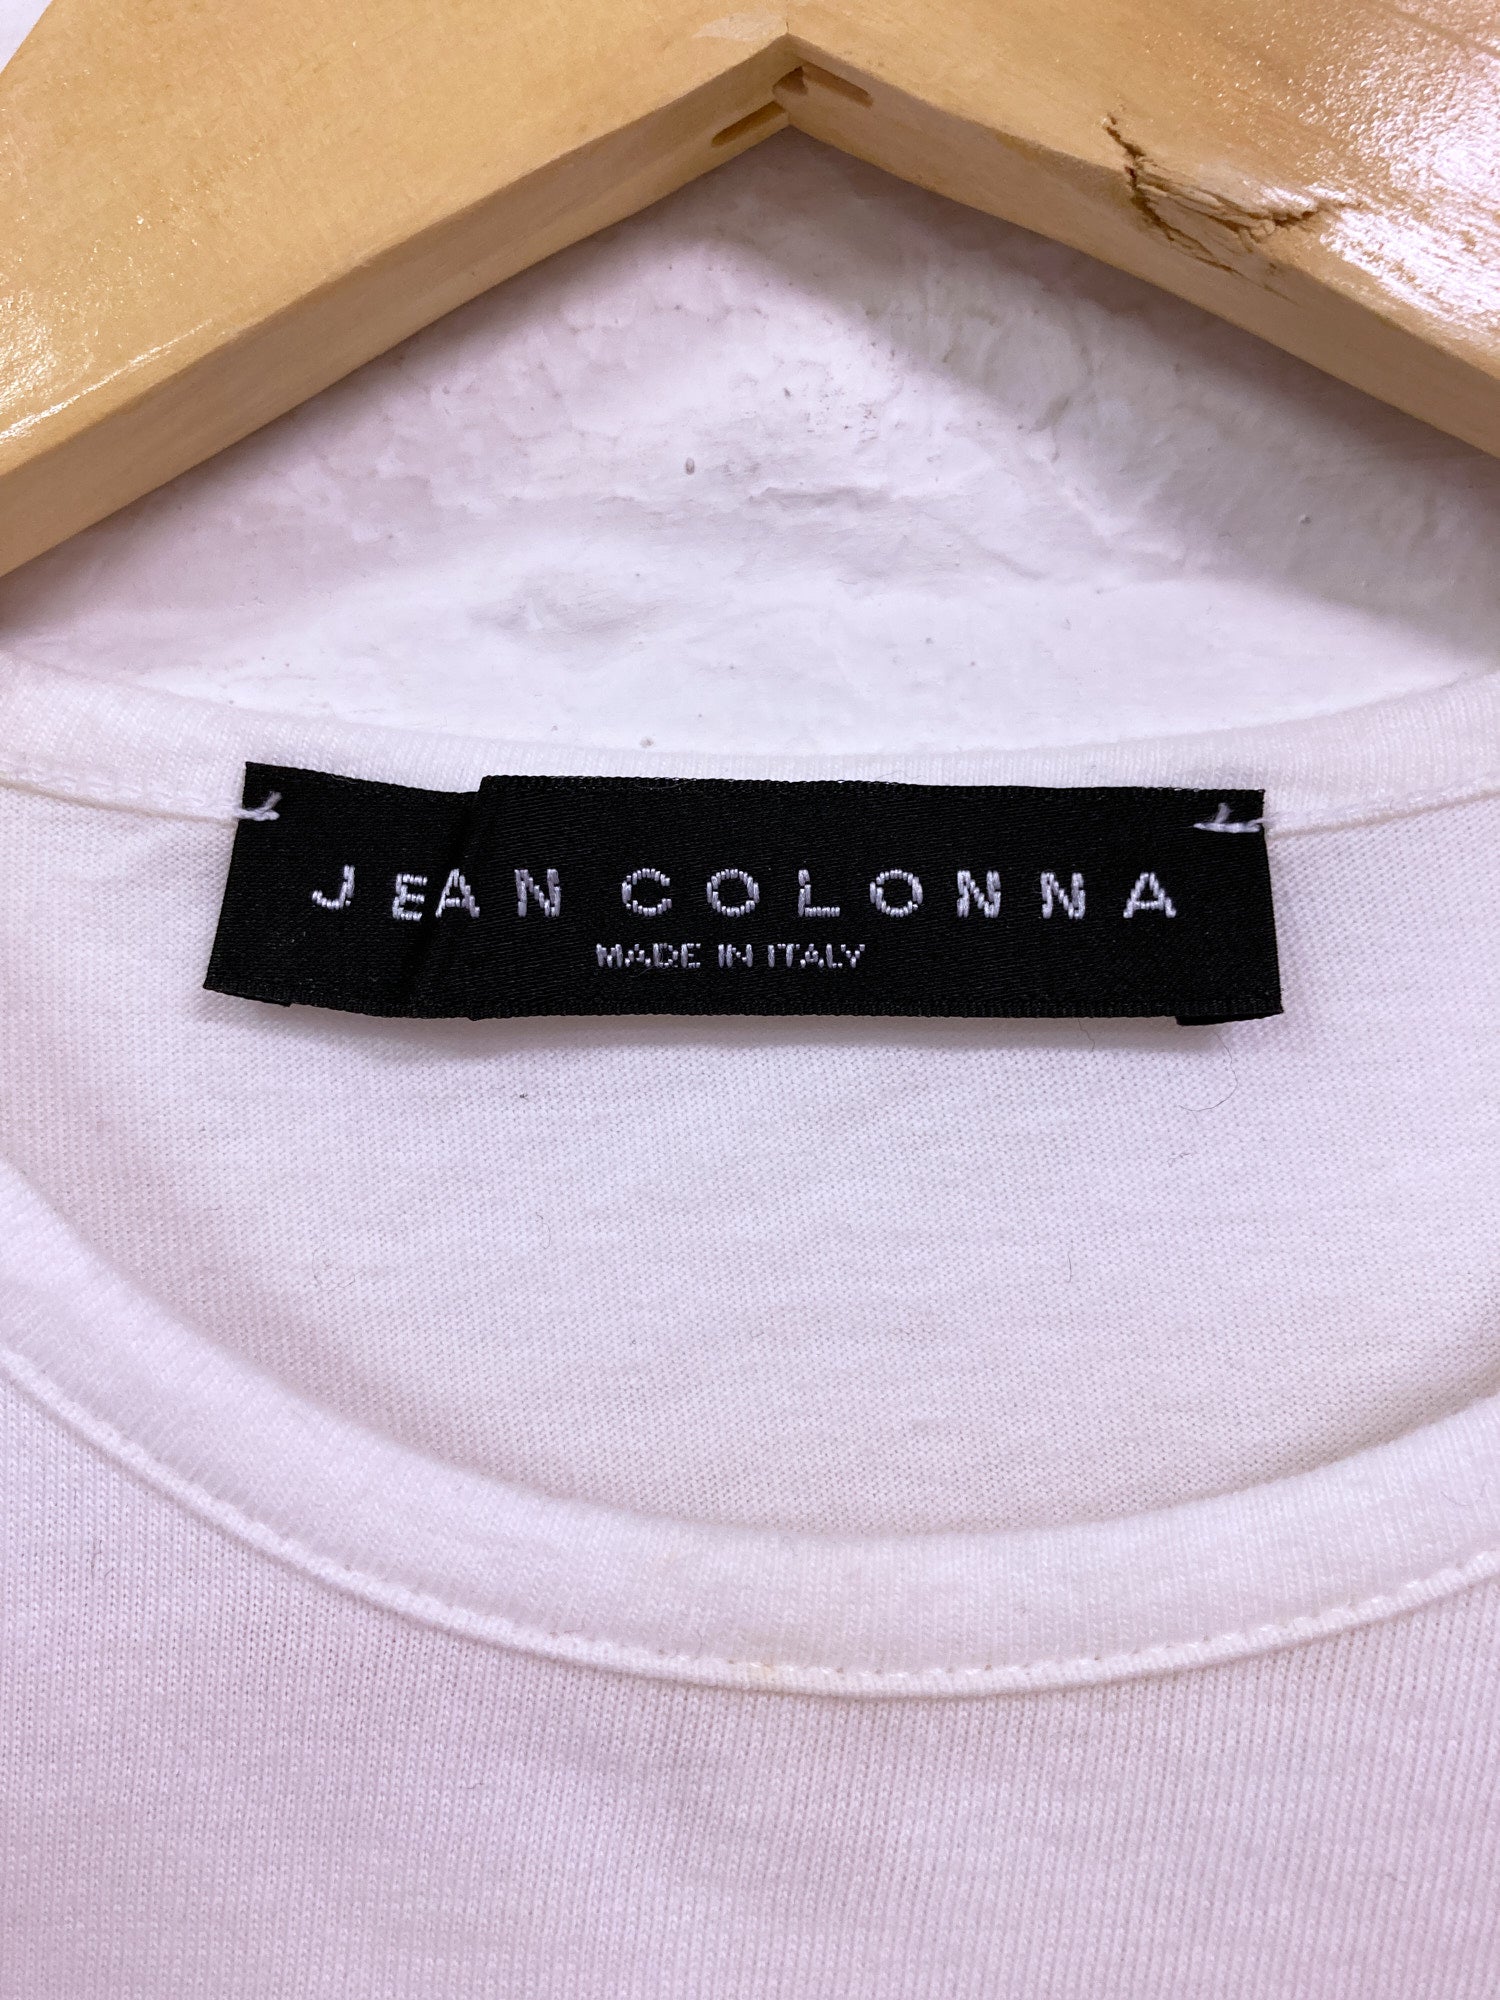 Jean Colonna white cotton jersey long sleeve t-shirt with underarm opening - S